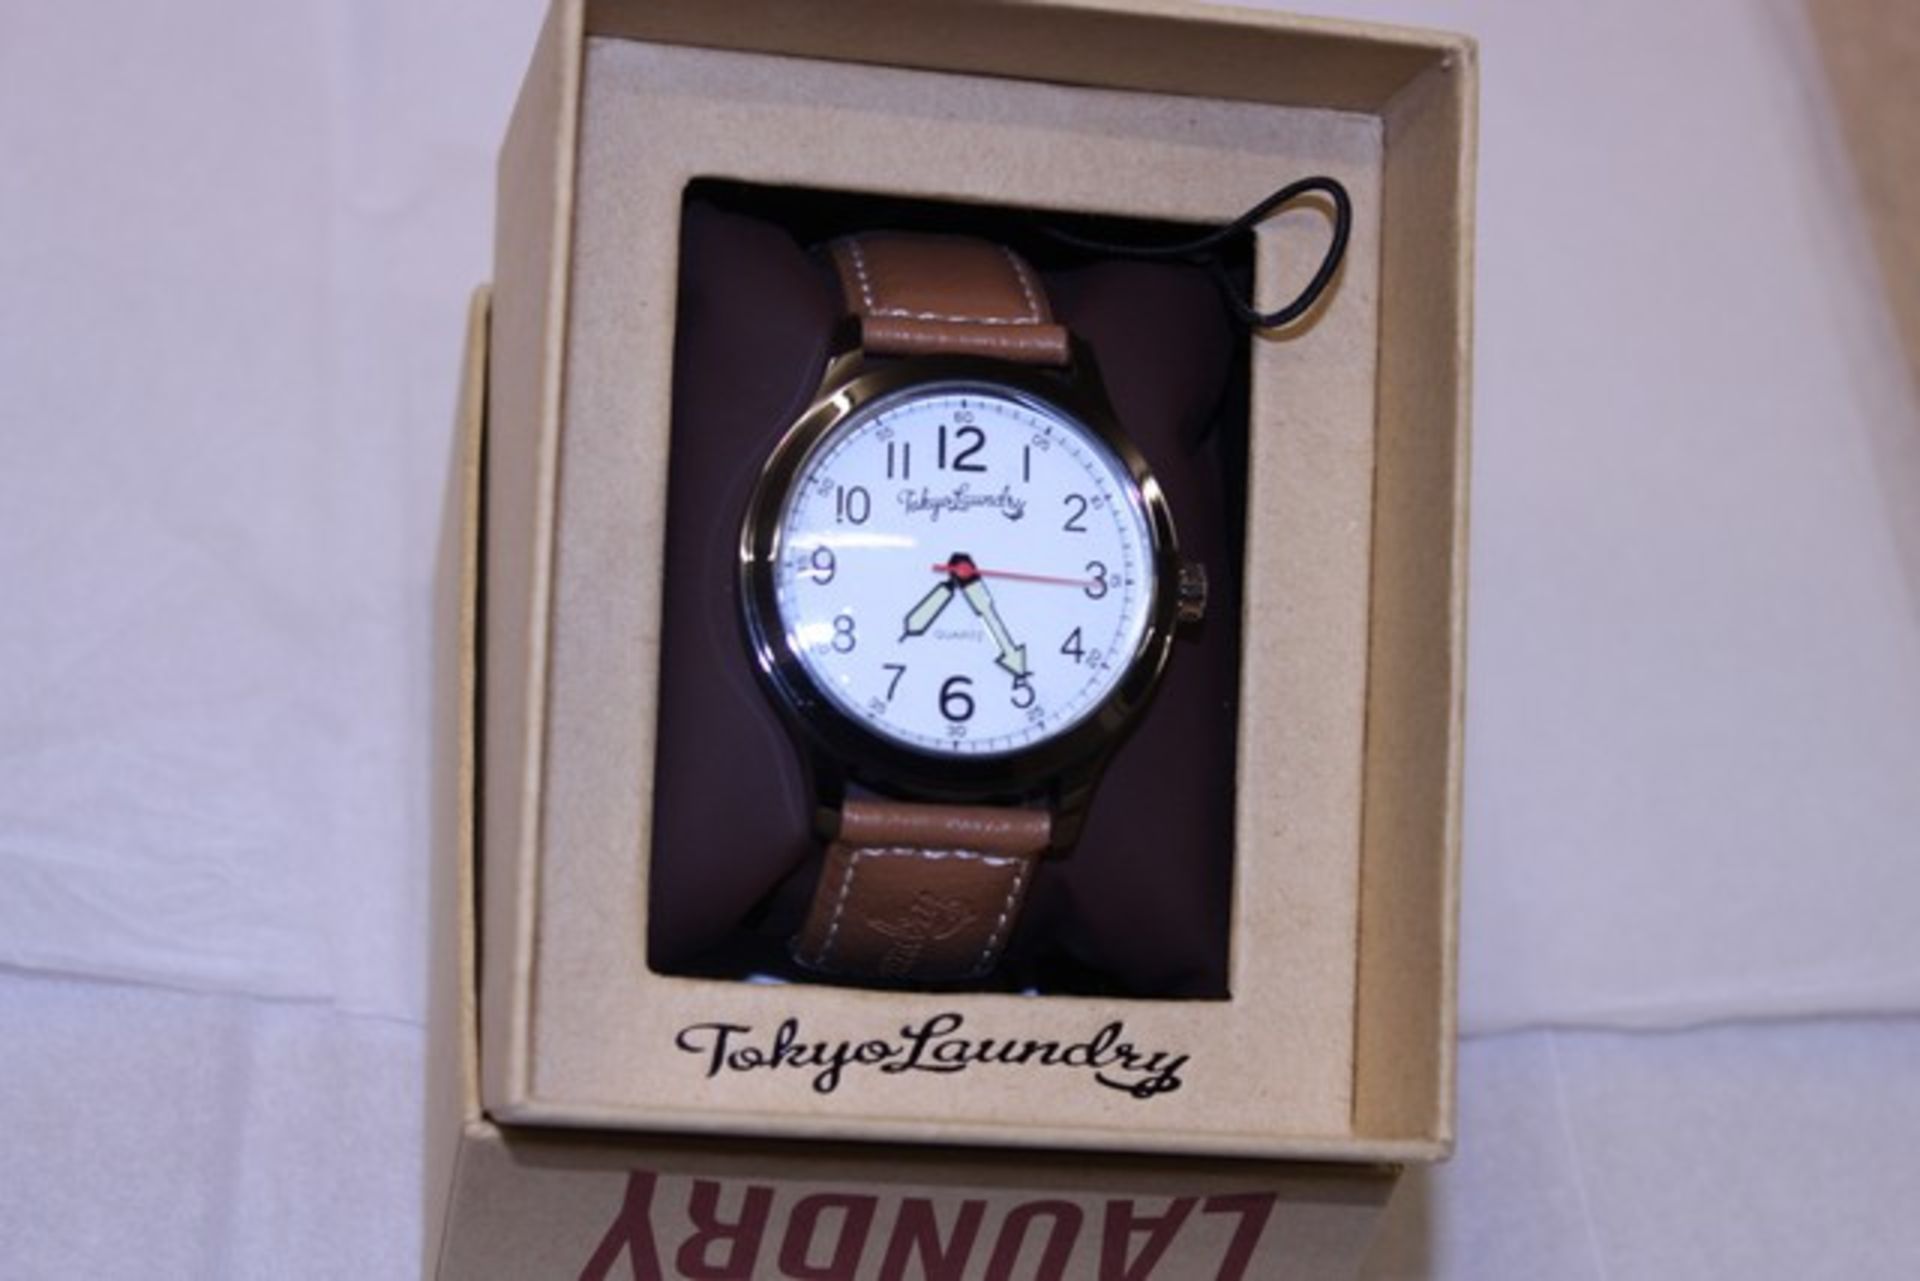 + VAT Brand New Gents Tokyo Laundry Brown Strap White Face Analogue Watch - RRP £49.99